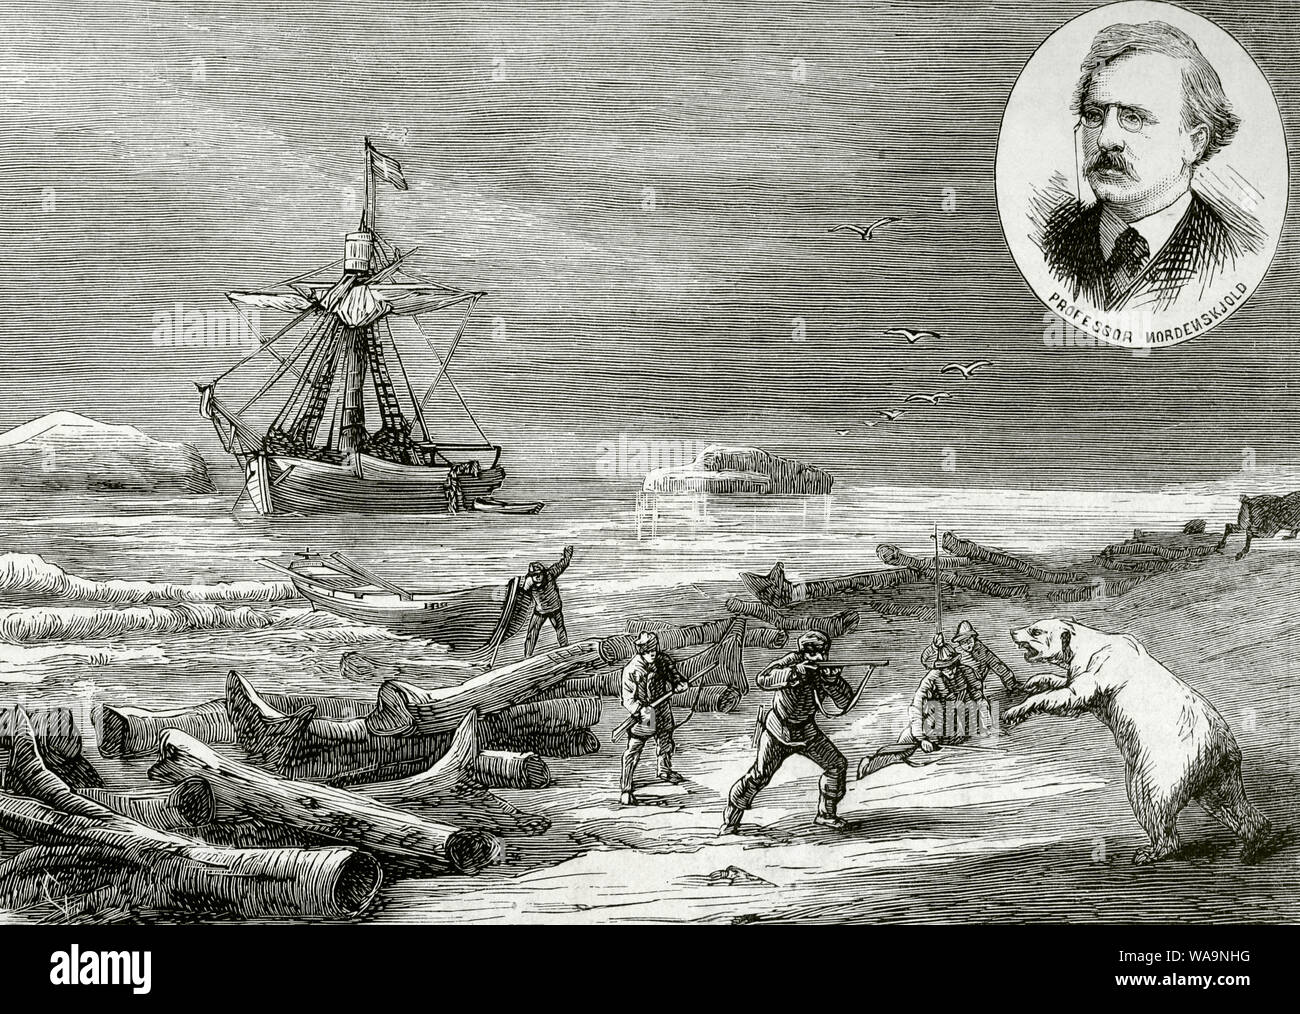 Swedish expedition to Arctic Pole. 'Proven' crew members attacked by a polar bear. Professor Nordenskiöld led the expedition. In 1875, aboard the 'Proven' sailing yacht, Adolf Erik Nordenskiöld (1832-1901) sailed across the Kara Sea to the mouth of the river Yenisei, from where he returned to Sweden through St. Petersburg, while Kjellmann, one of his companions, arrived at the Norwegian port of Hammerfest aboard the 'Proven' . Engraving. La Ilustracion Española y Americana, March 8, 1876. Stock Photo